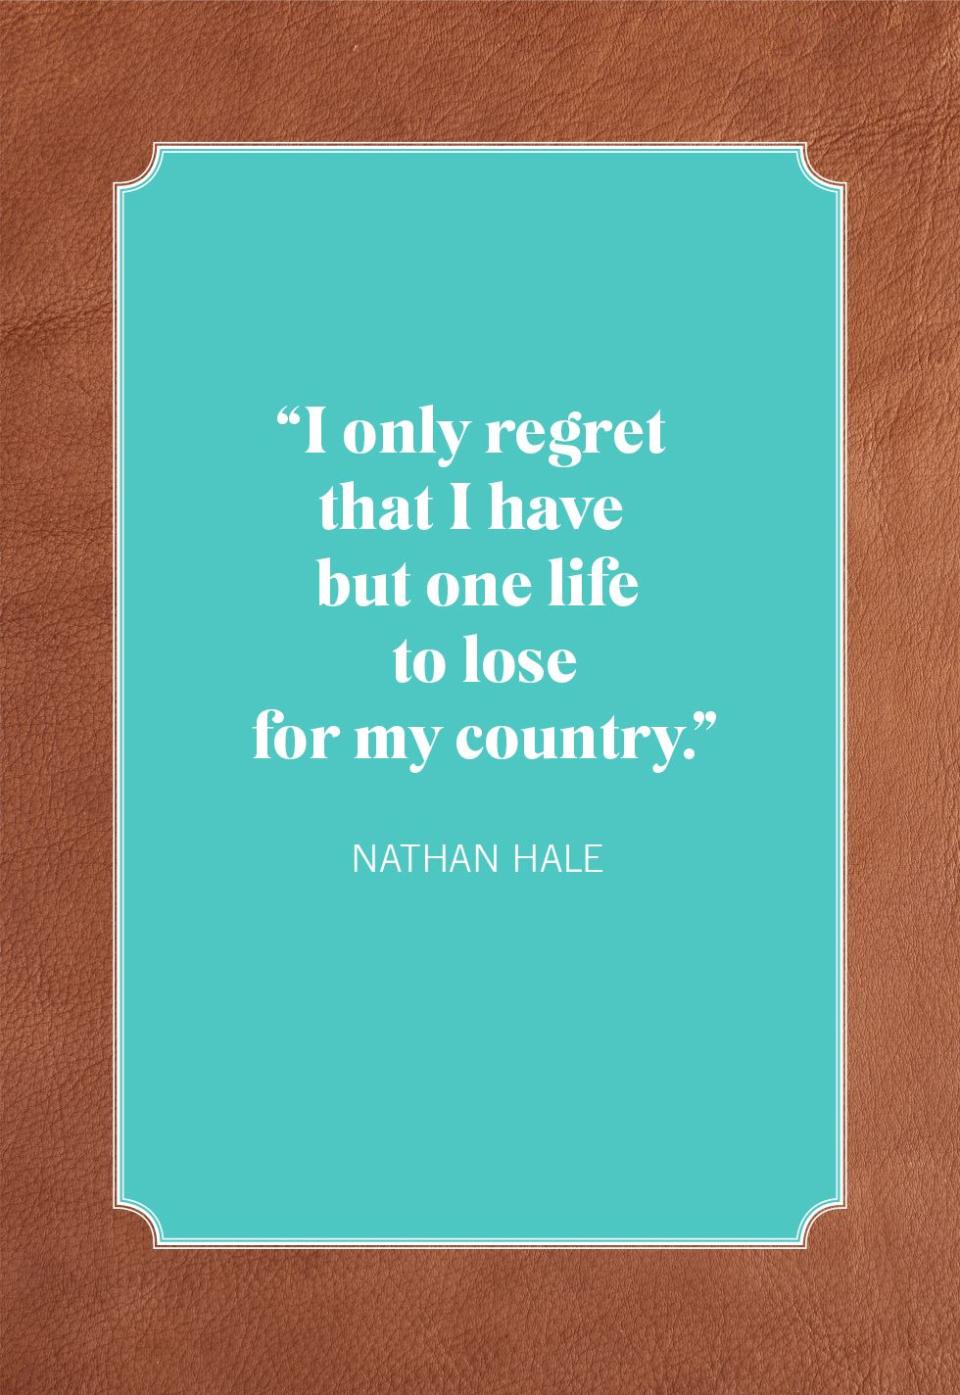 memorial day quotes nathan hale